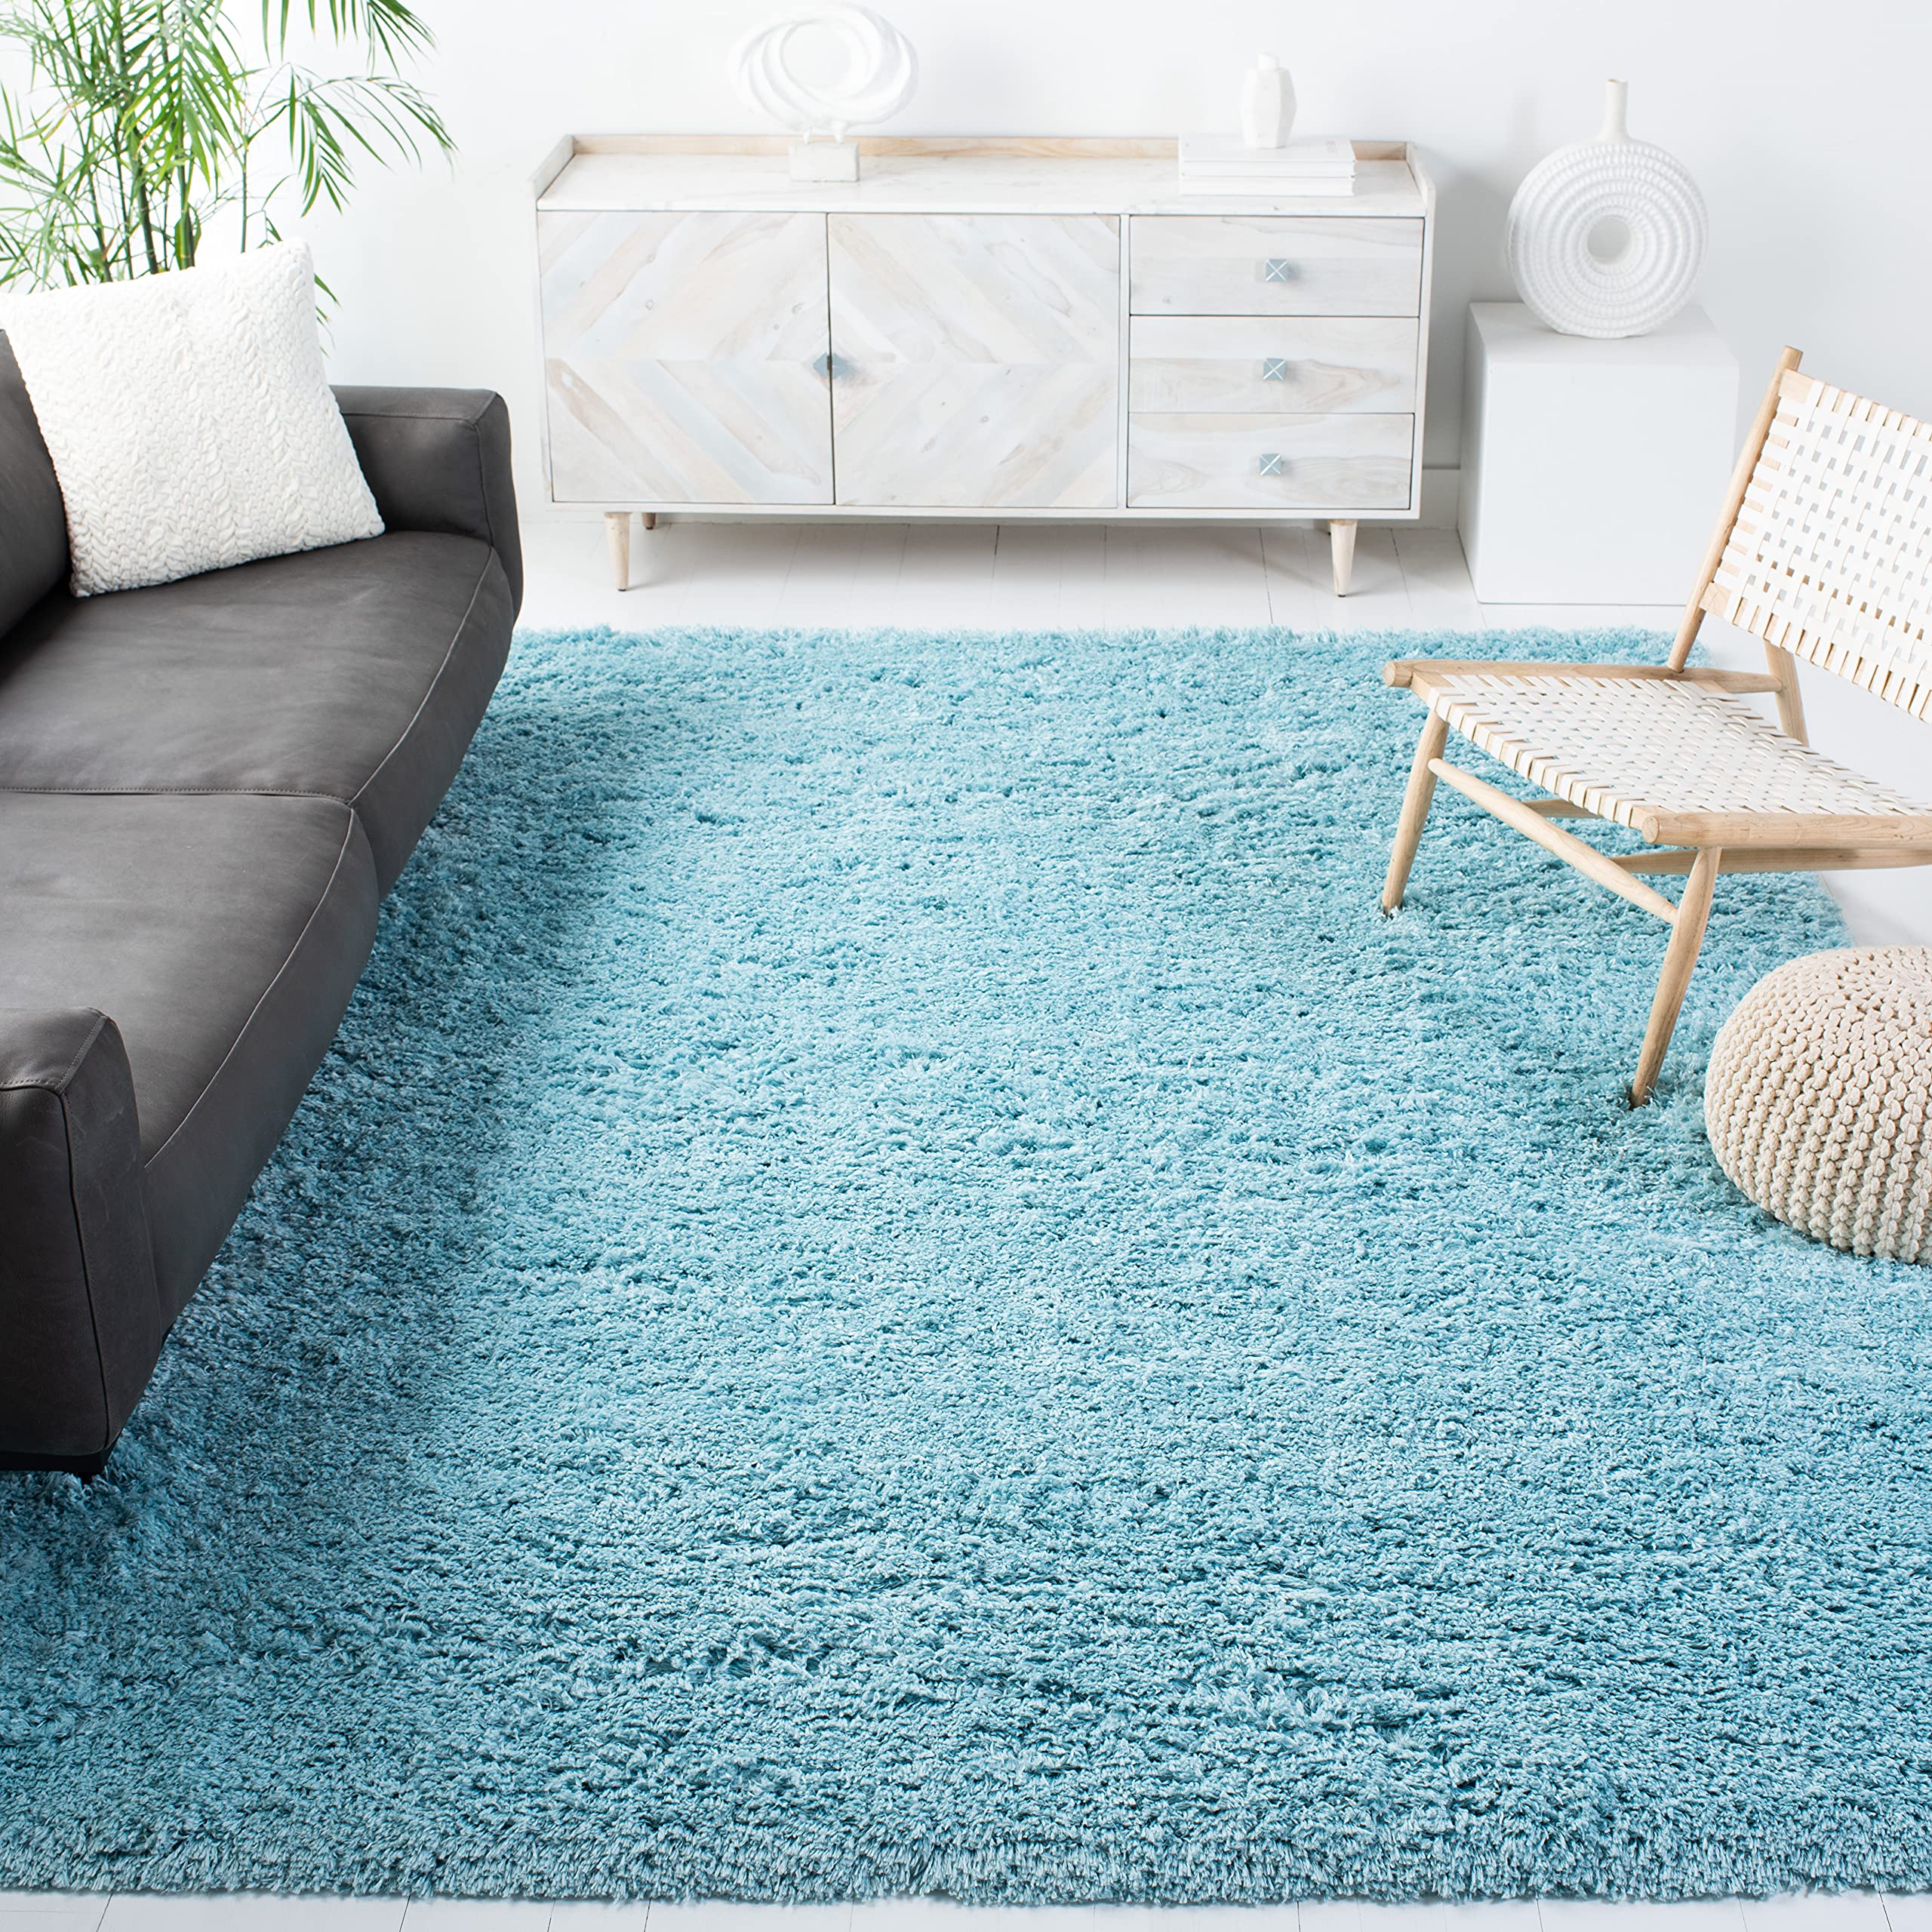 Safavieh Polar Shag Collection Area Rug - 9' x 12', Light Turquoise, Solid Glam Design, Non-Shedding & Easy Care, 3-inch Thick Ideal for High Traffic Areas in Living Room, Bedroom (PSG800T)